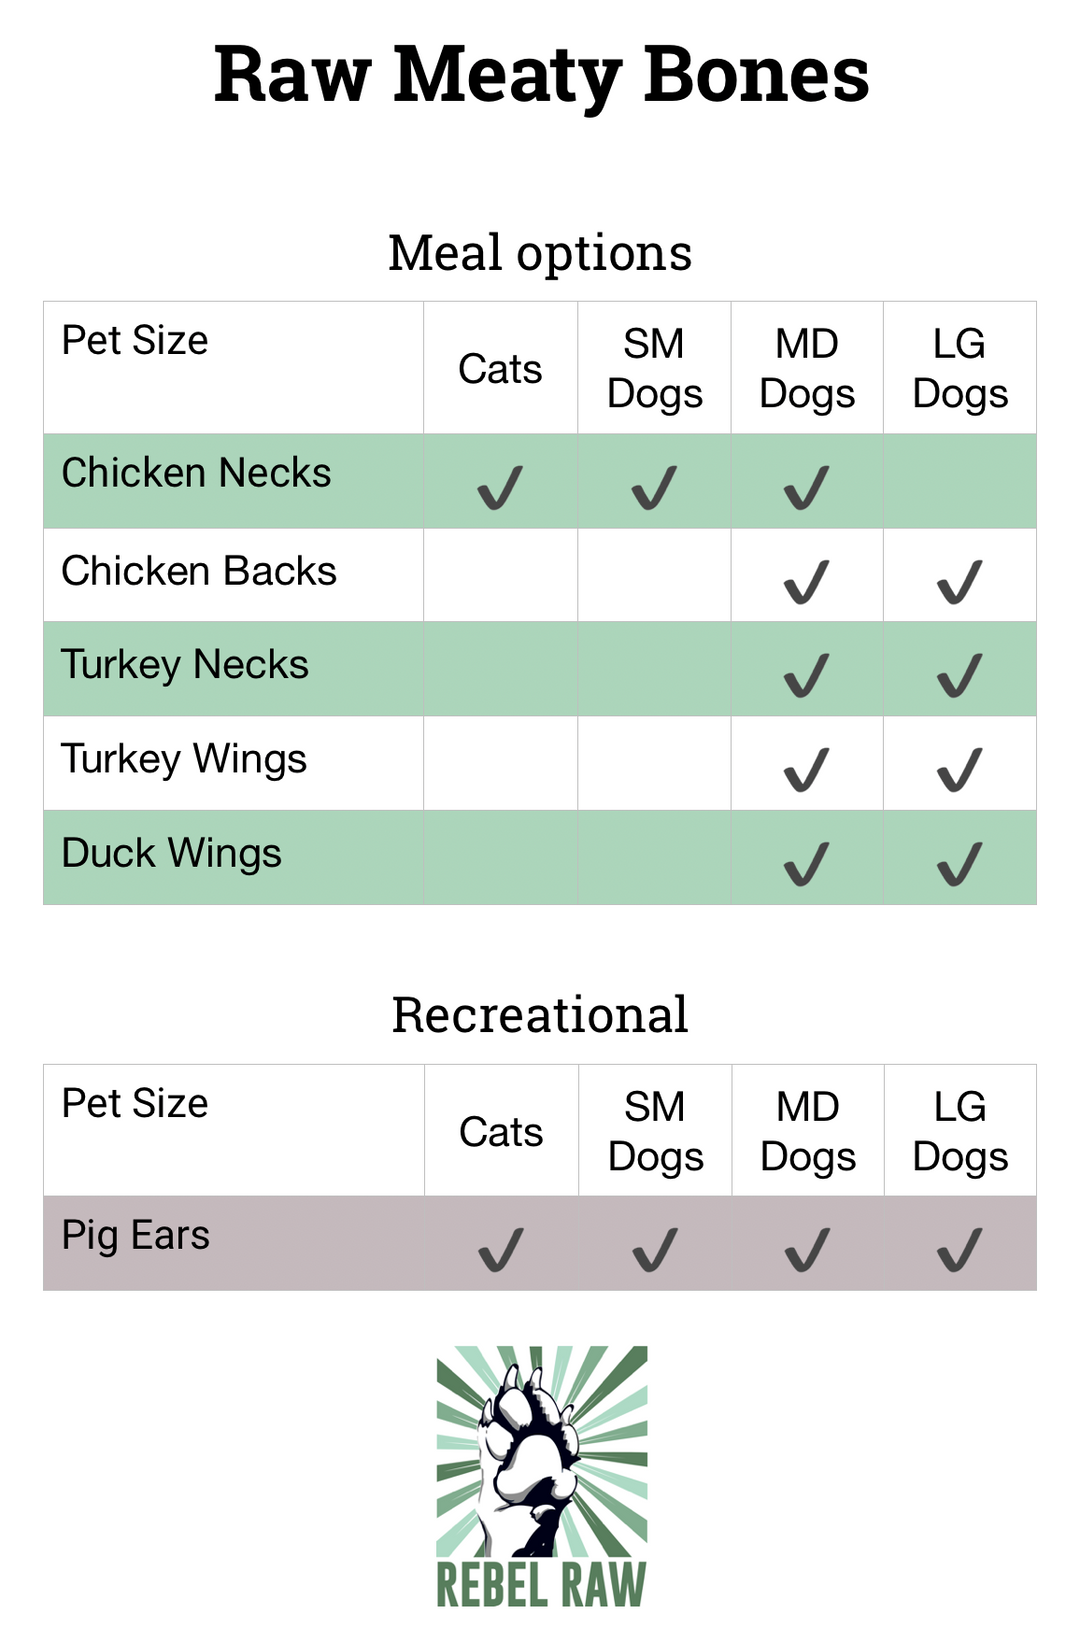 Which type of Raw Meaty Bone is right for your pet?